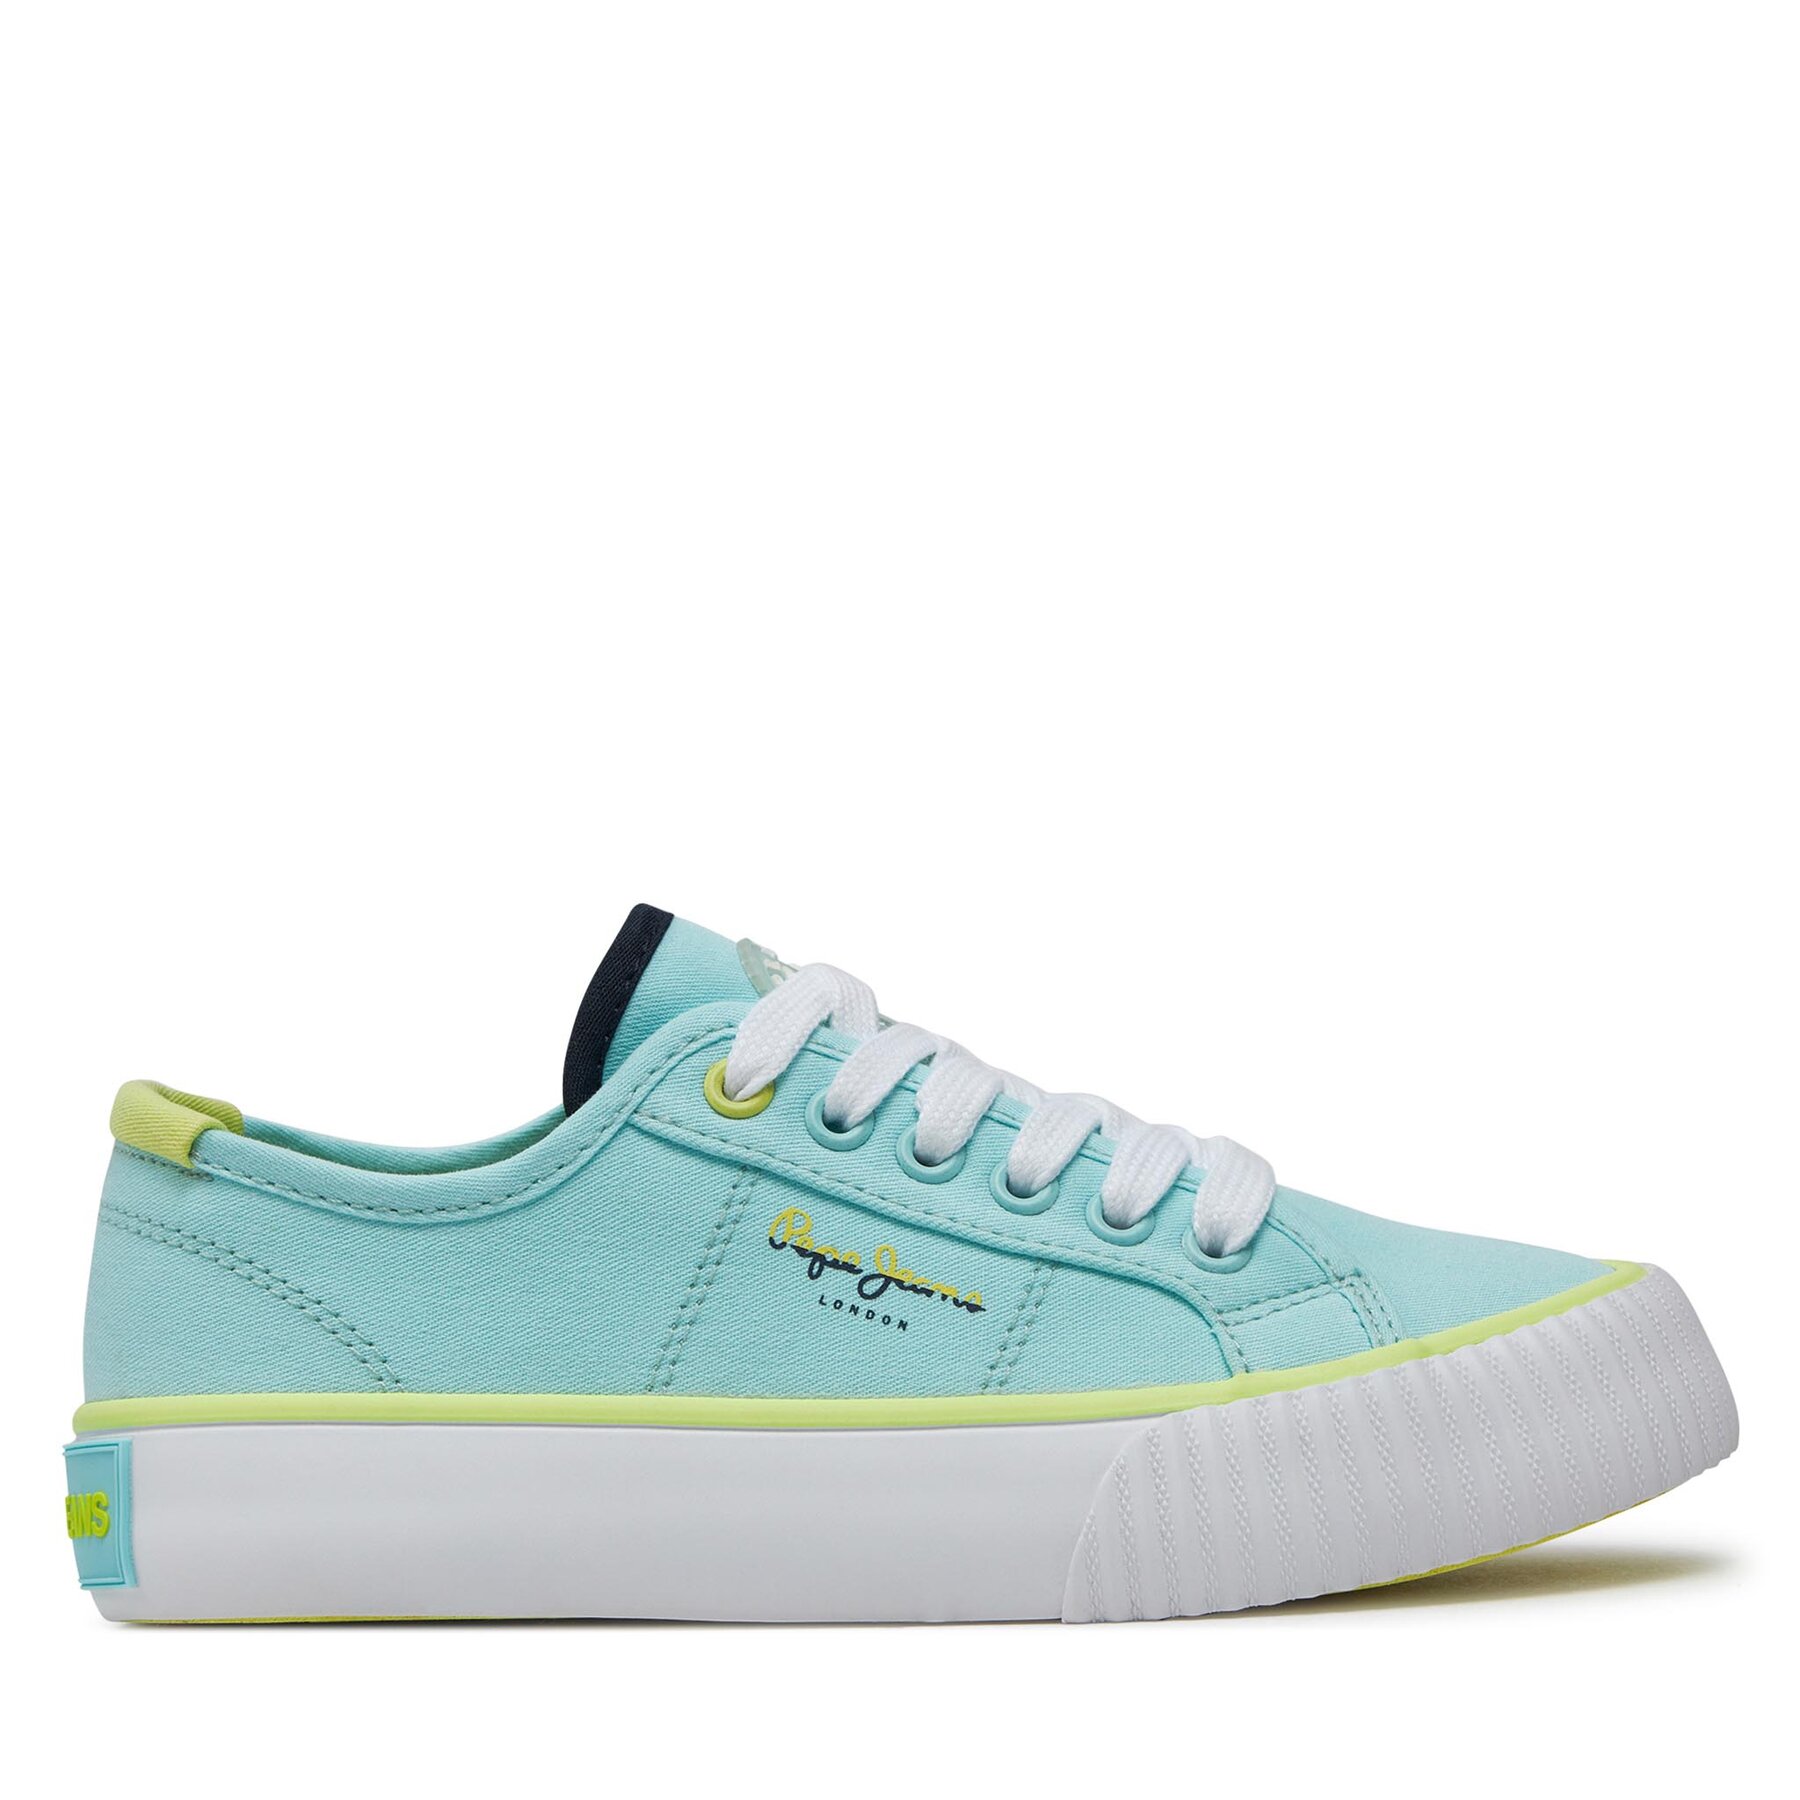 Sneakers aus Stoff Pepe Jeans Ottis Basic G PGS30605 Pearl Blue 505 von Pepe Jeans